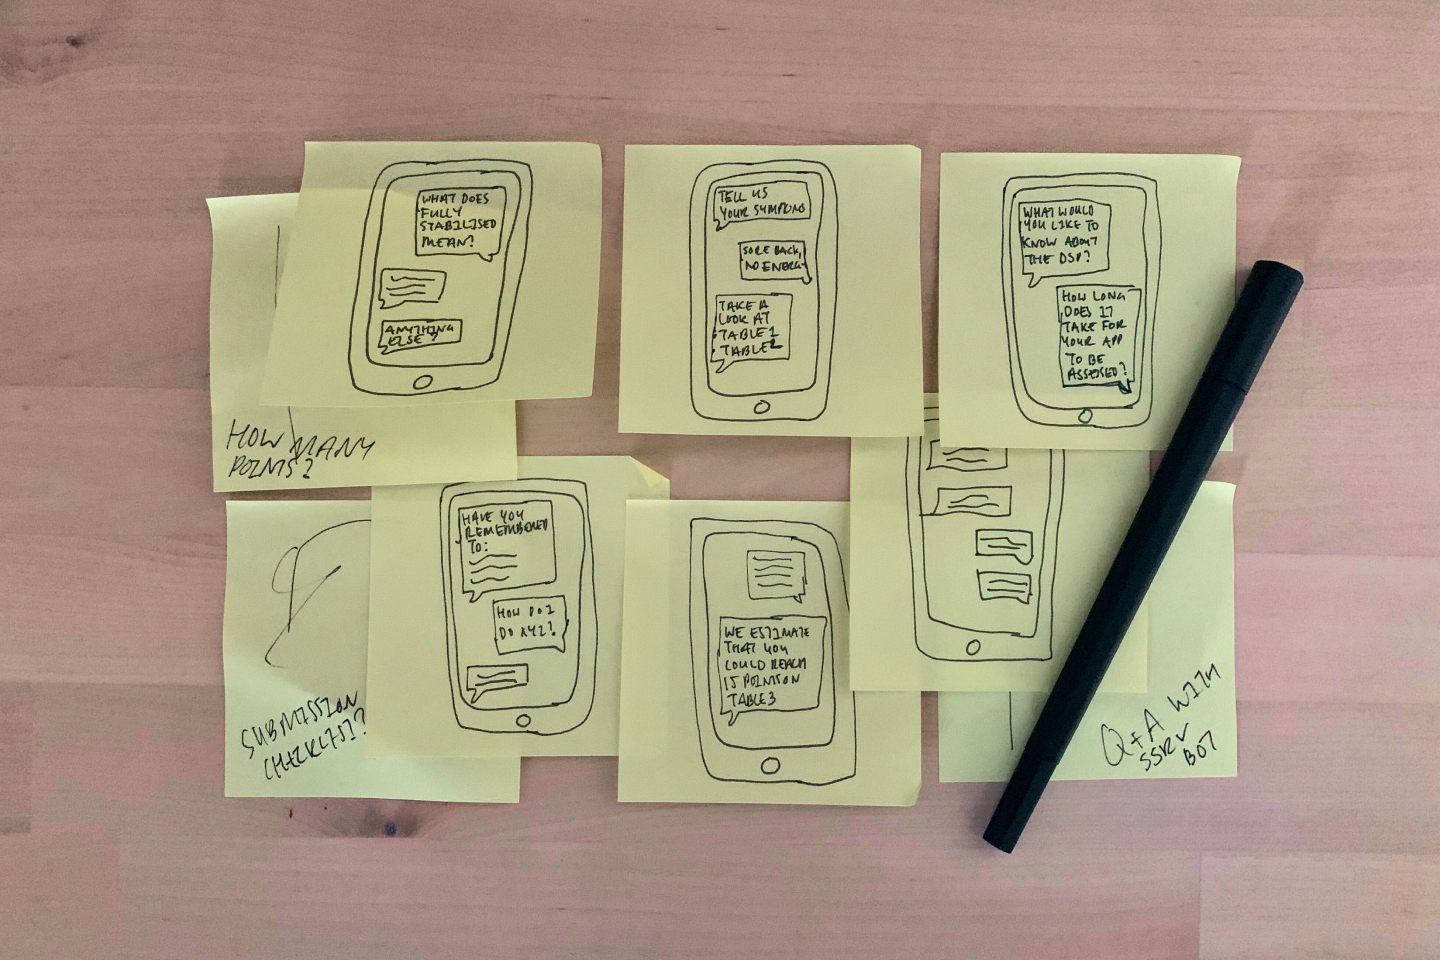 Postit notes from a design iteration session